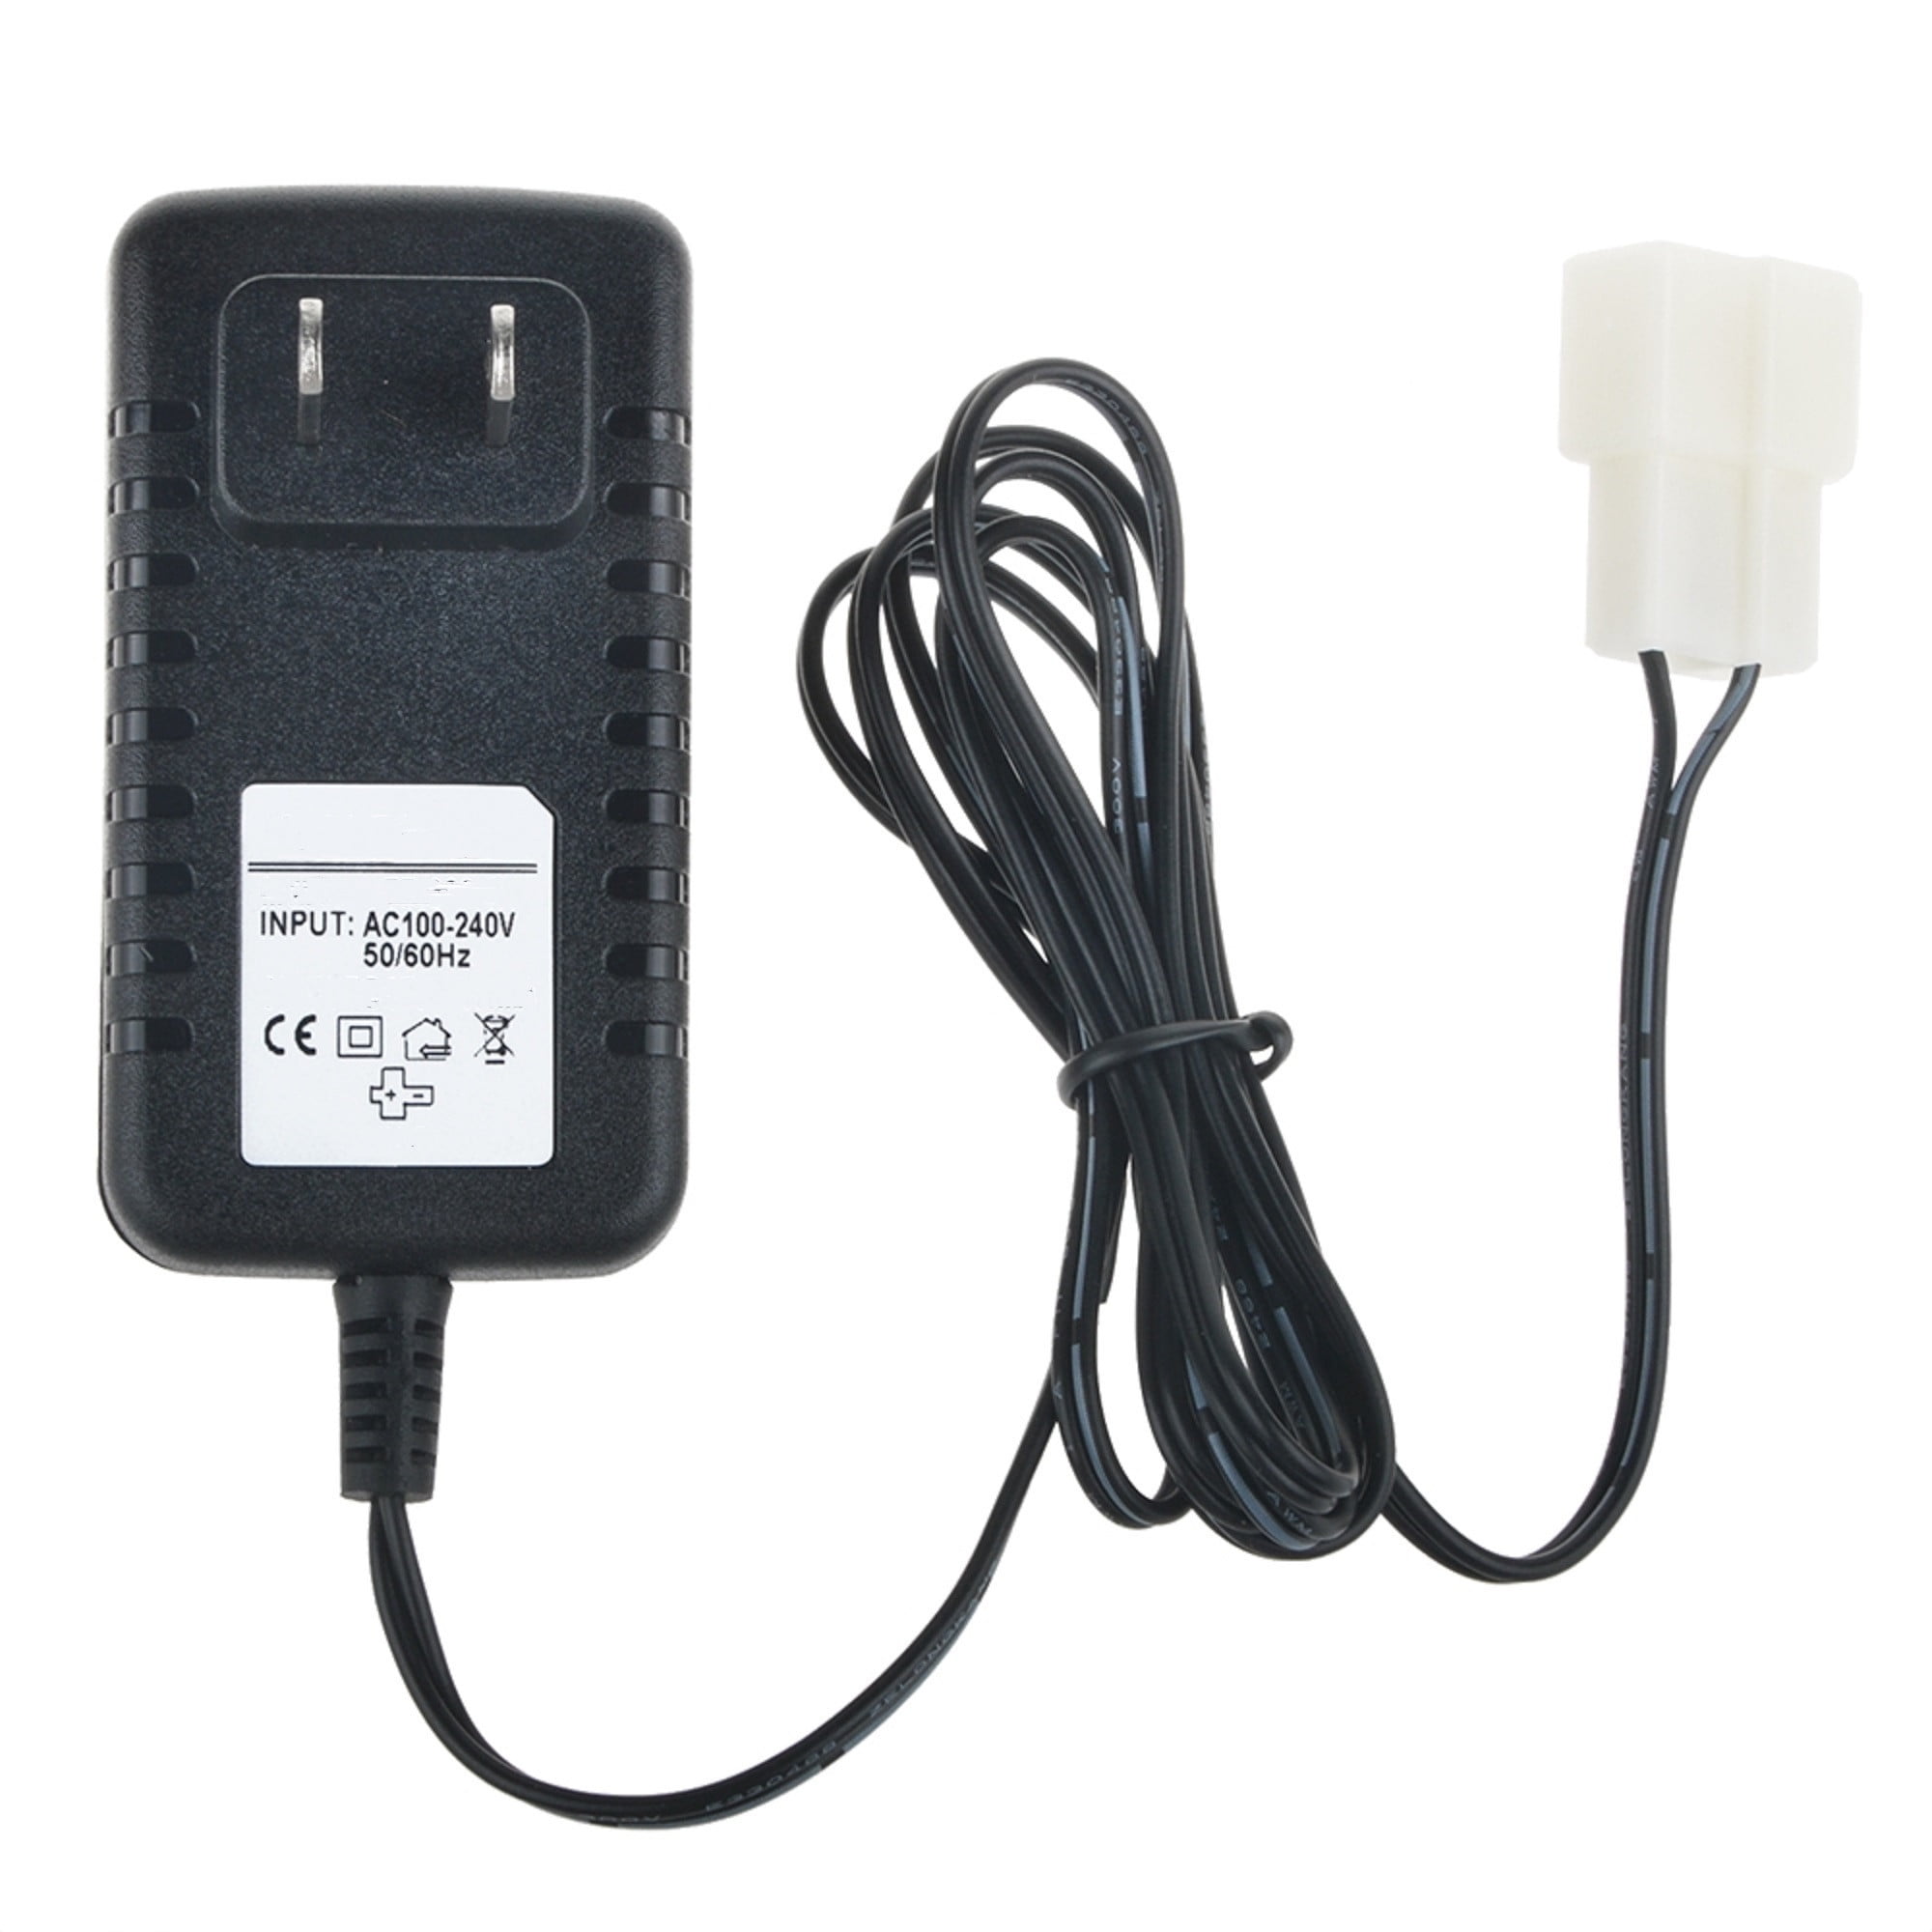 WALL CHARGER AC adapter 4F KT1277WMA KID TRAX pickup truck heavy hauling ride on 